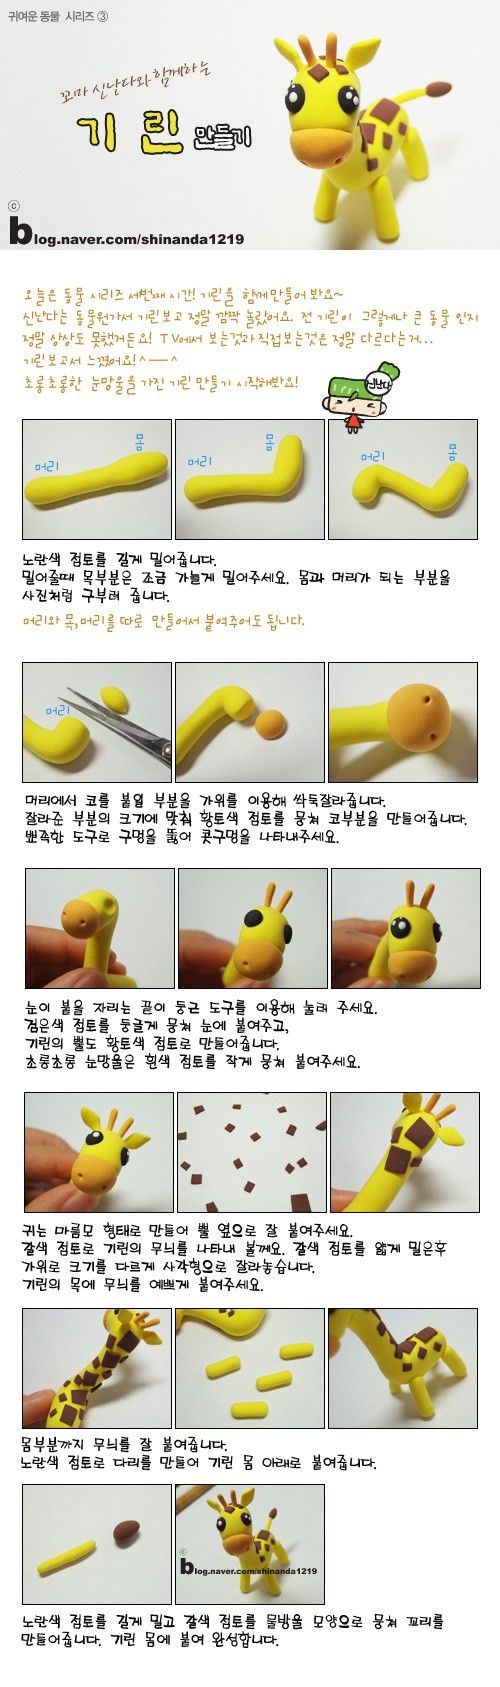 This website has lots of good picture tutorials for clay figures. Though in Japa